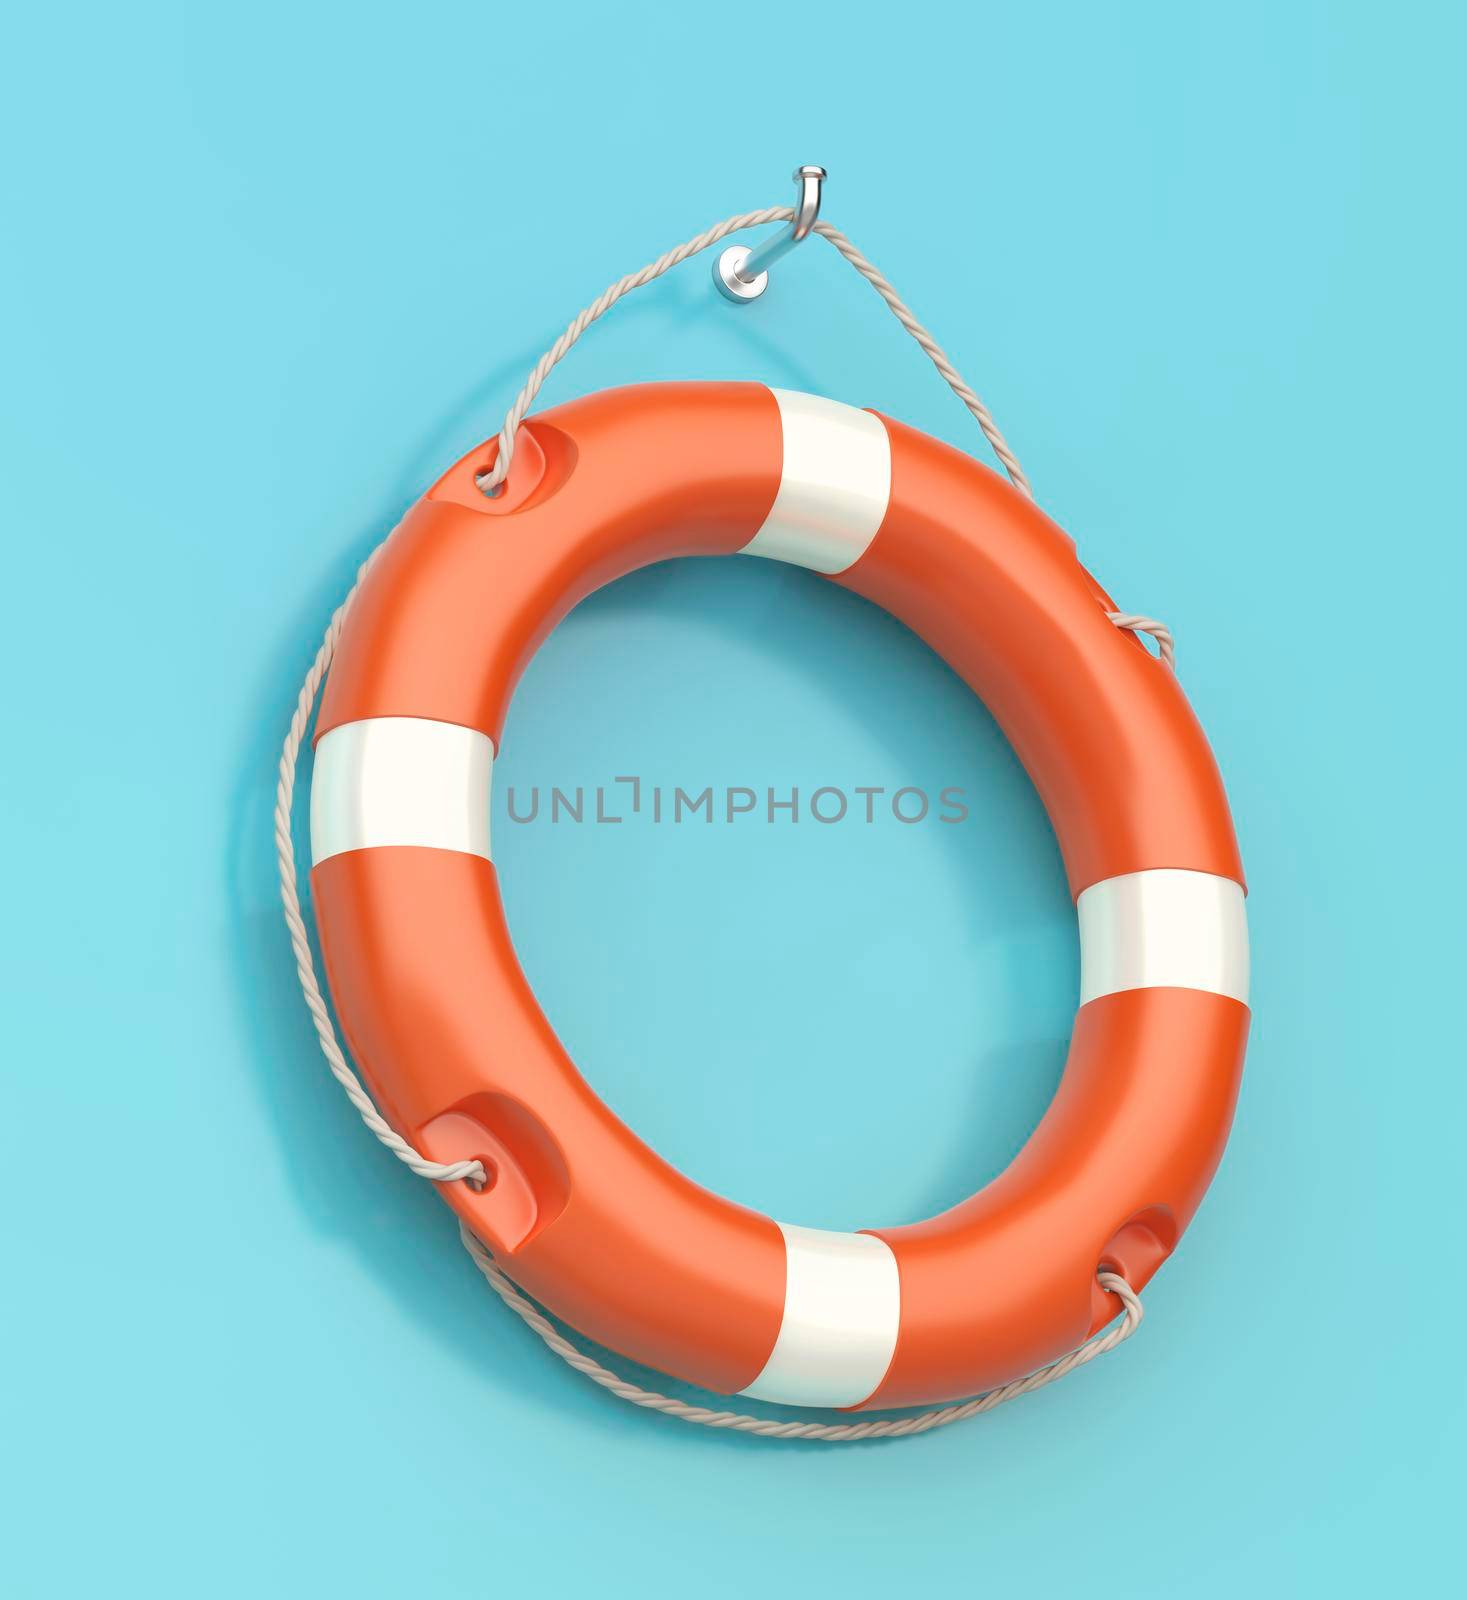 Lifebuoy ring on a wall
 by magraphics